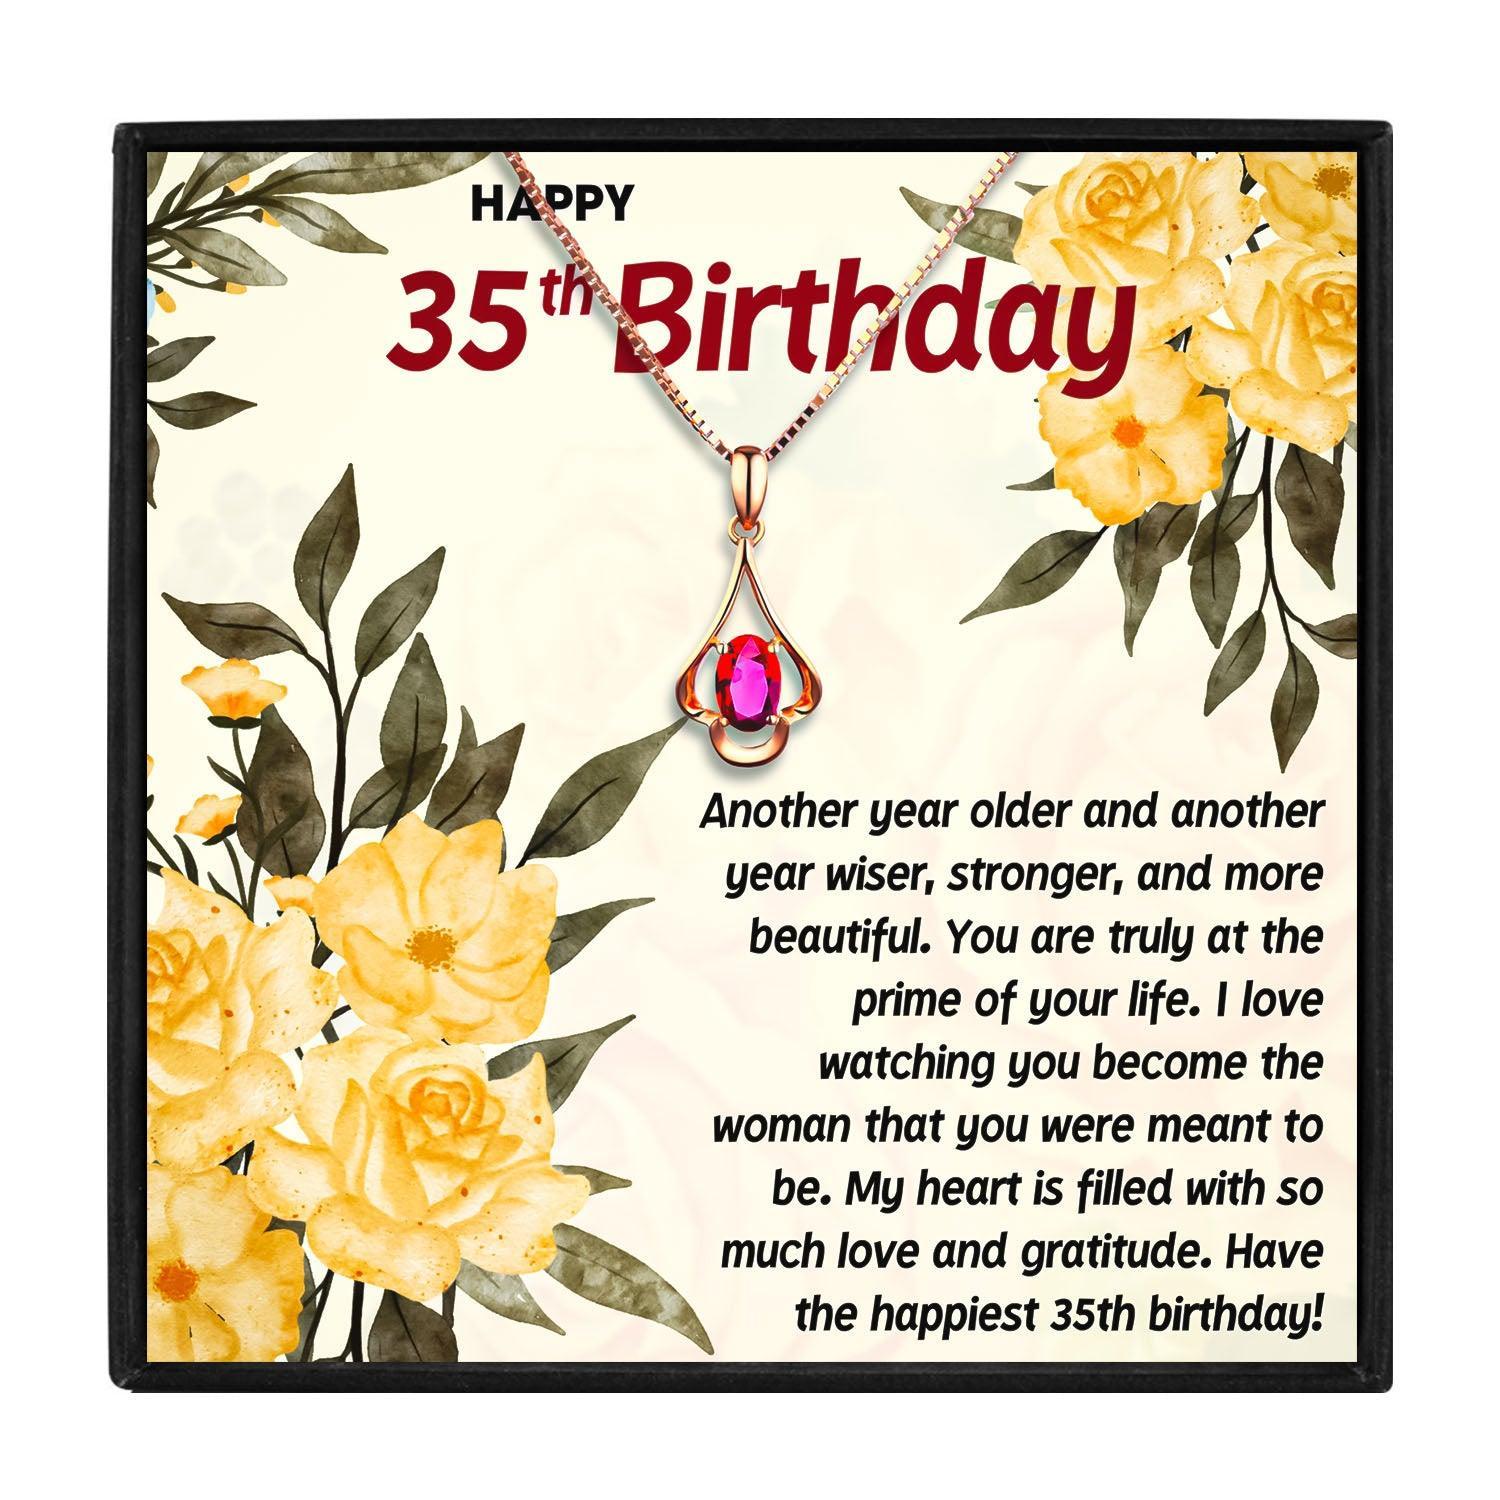 Gift Ideas for a Wife's 35th Birthday in 2023 | Gift Ideas for a Wife's 35th Birthday - undefined | 35 birthday gift, 35th birthday ideas for a woman, 35th birthday ideas for her, 35th birthday ideas for wife | From Hunny Life | hunnylife.com